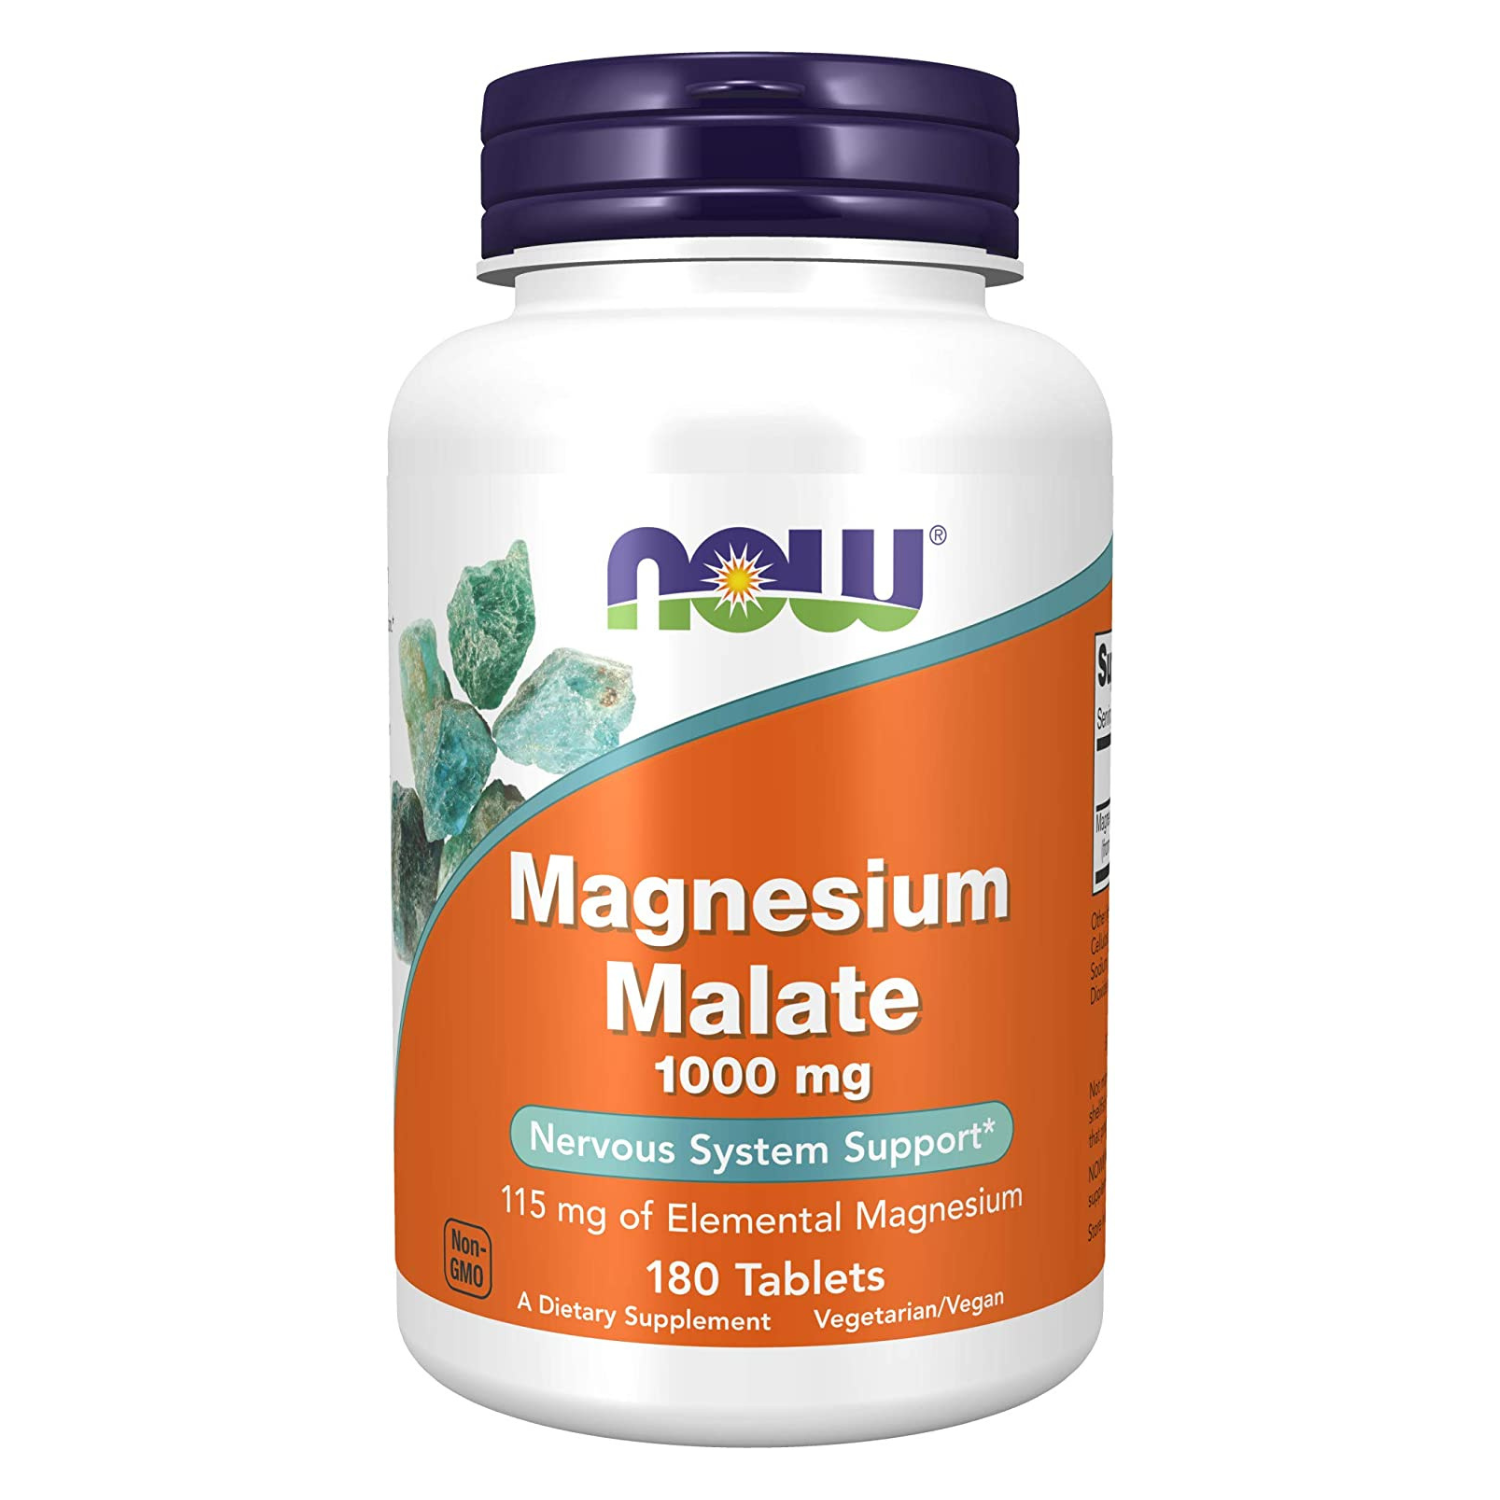 NOW - Magnesium Malate 1000 mg, Nervous System Support - 180 Tablets